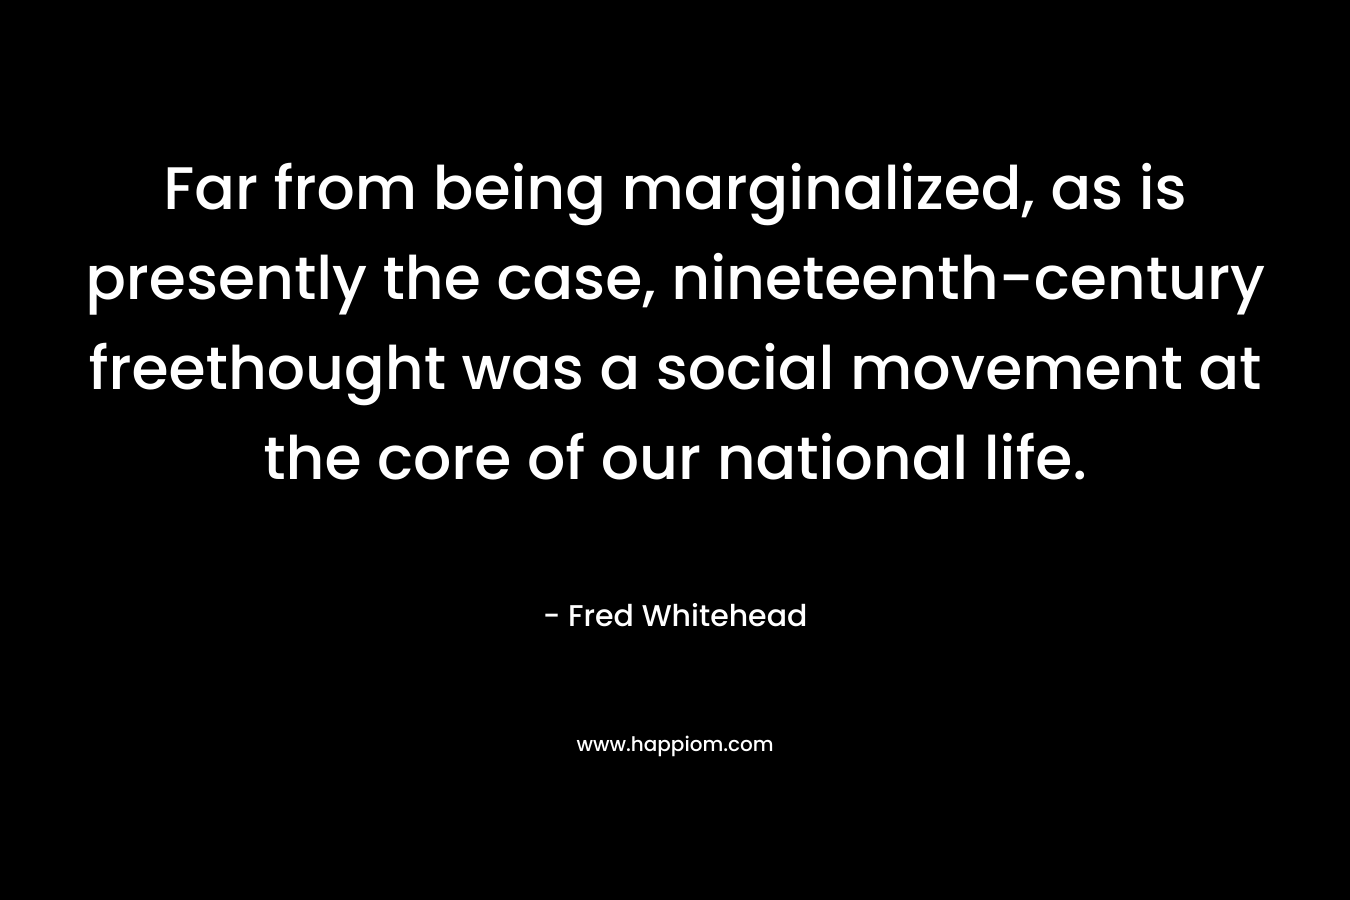 Far from being marginalized, as is presently the case, nineteenth-century freethought was a social movement at the core of our national life.